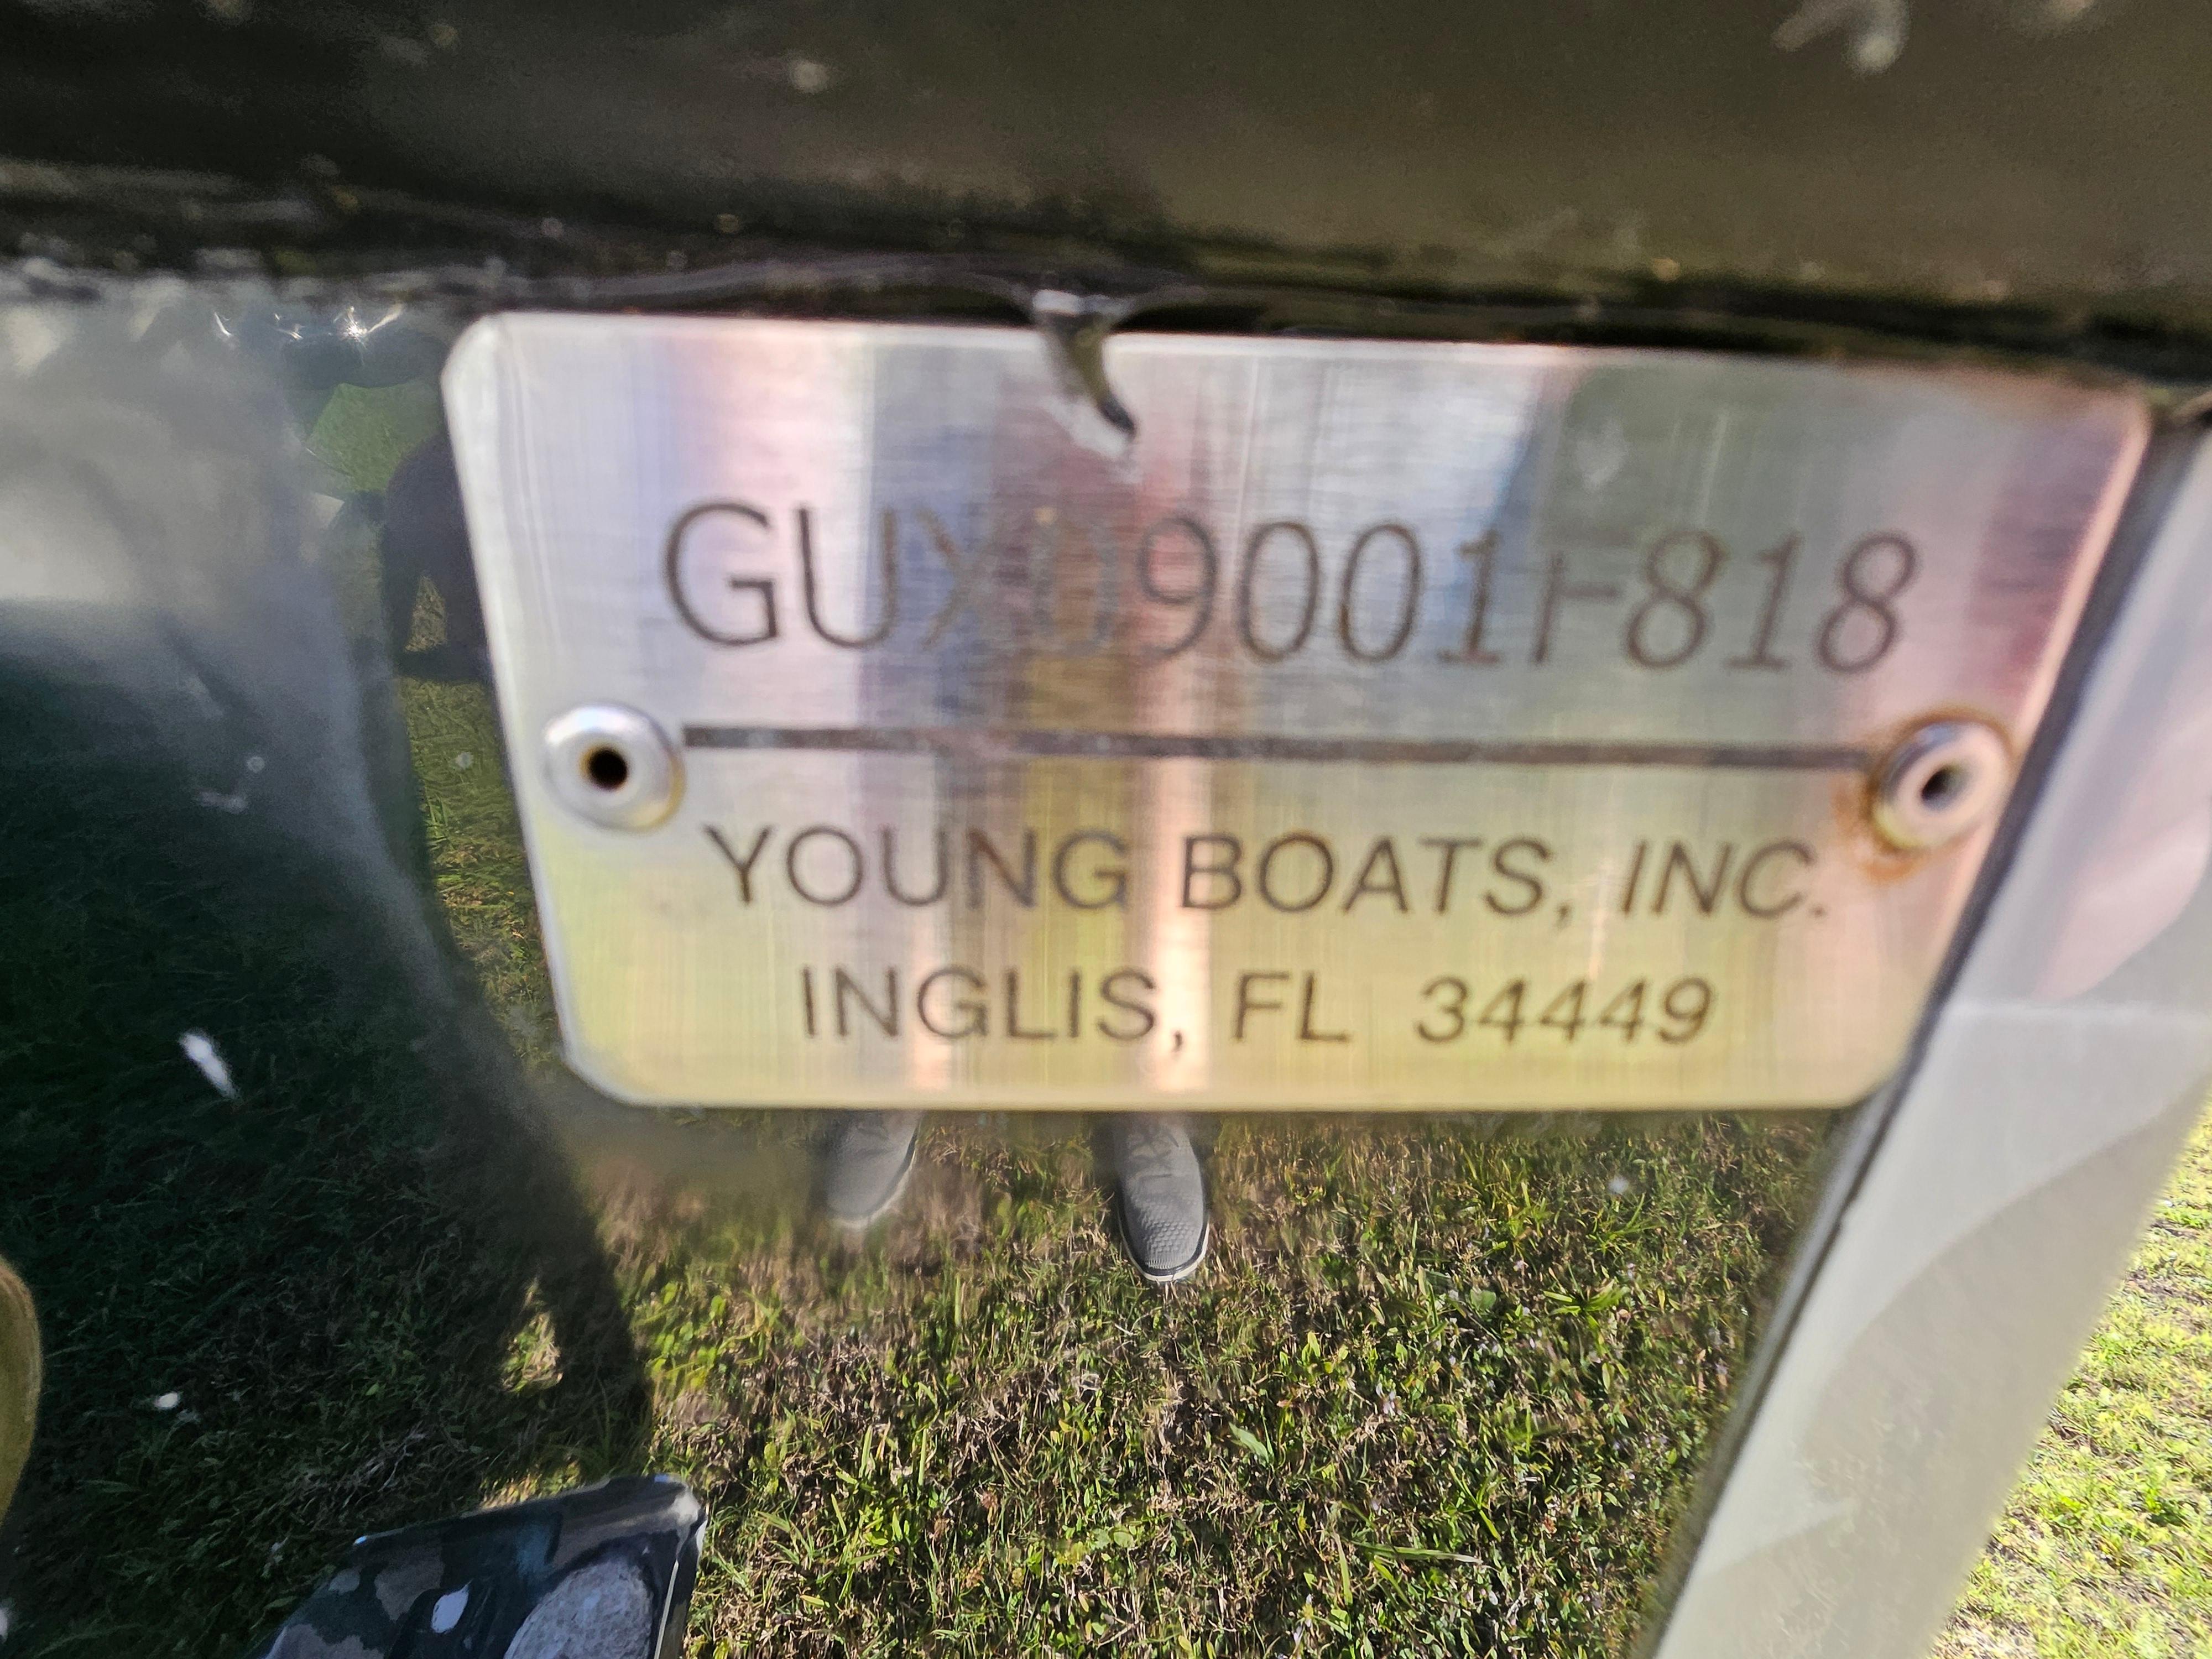 2018 Young Boats Gulfshore 26